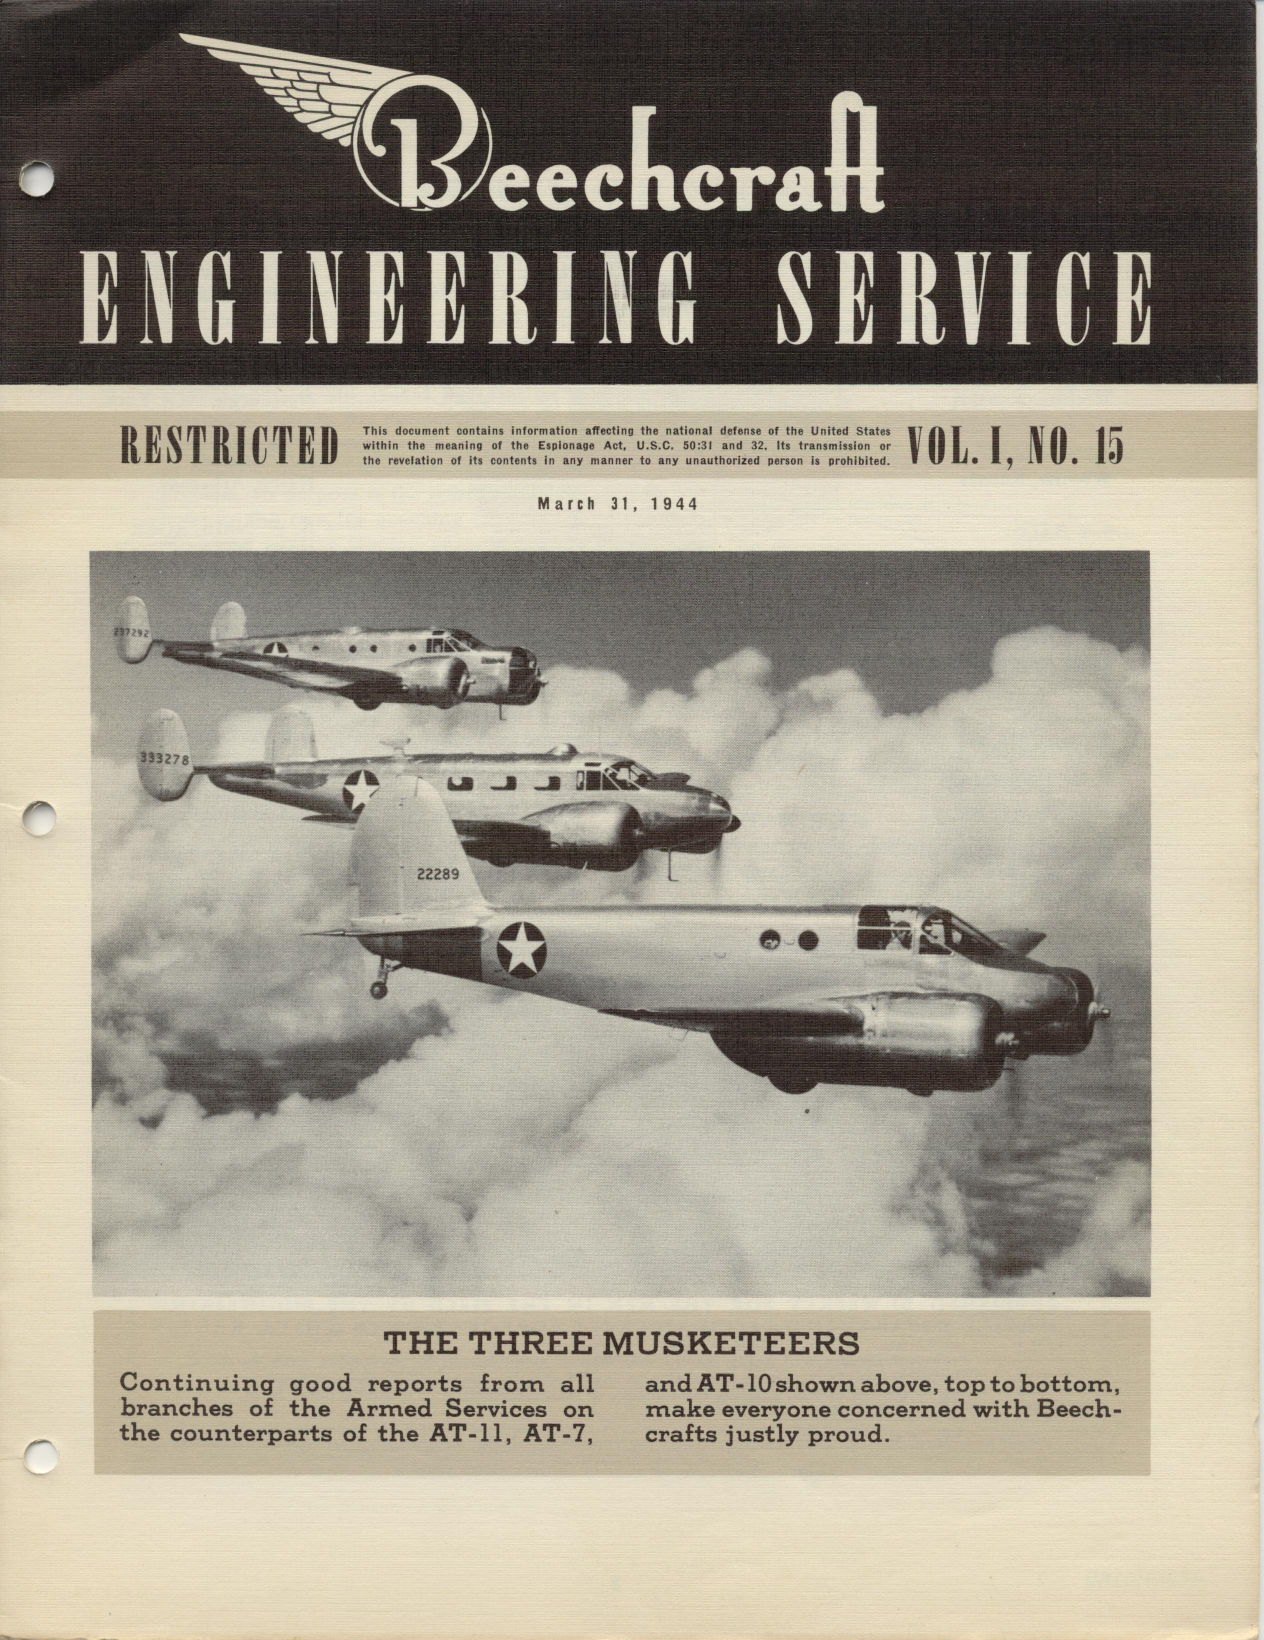 Sample page 1 from AirCorps Library document: Vol. I, No. 15 - Beechcraft Engineering Service